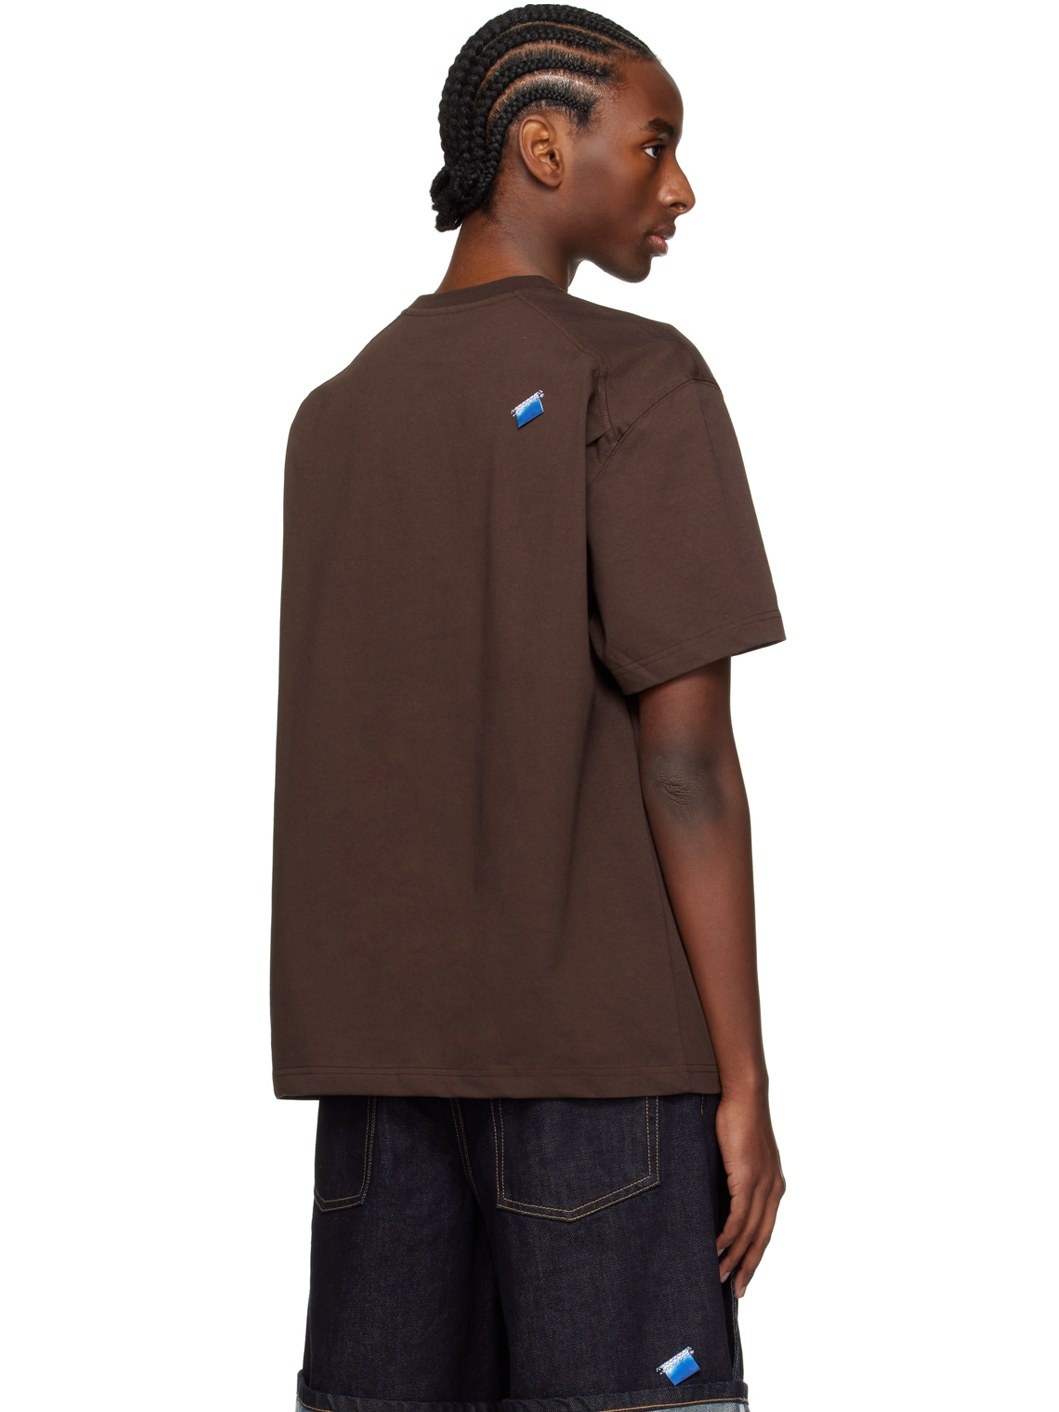 Brown Patch T-Shirt - 3